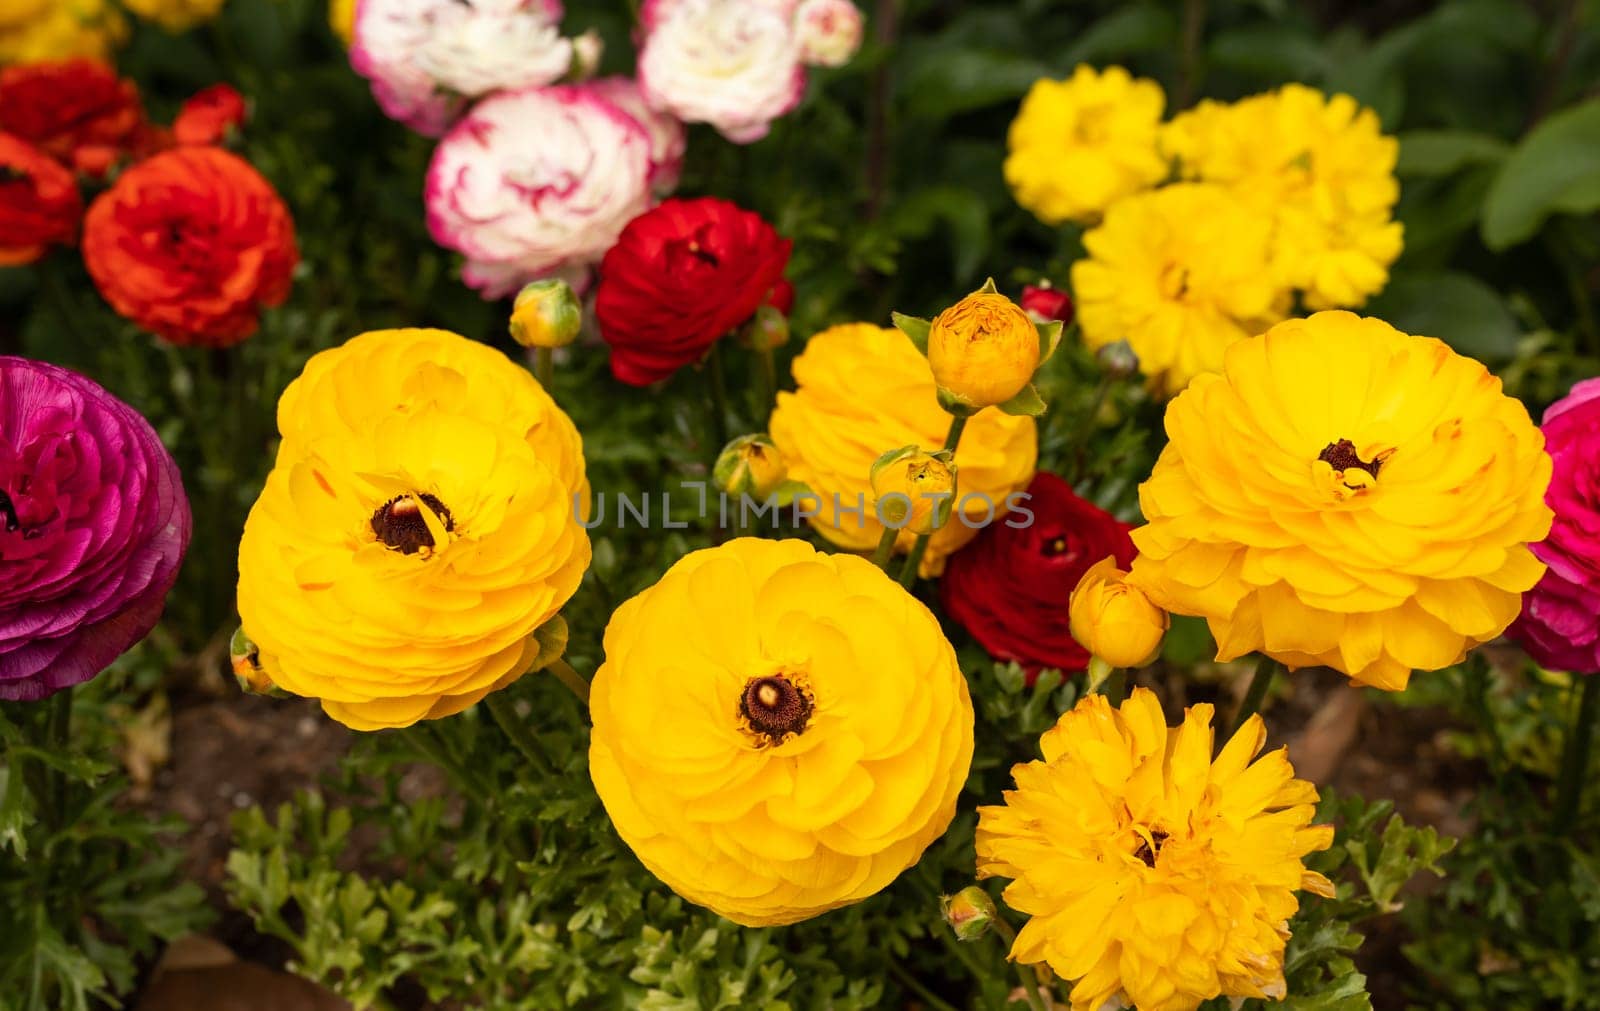 Multi Colorful Ranunculus Asiaticus or Rimmed Persian Buttercup Flower Outdoors In Garden Or Plant Nursery. Red, Yellow, White And Purple Flowers, Botany, Floriculture. Horizontal Plane by netatsi